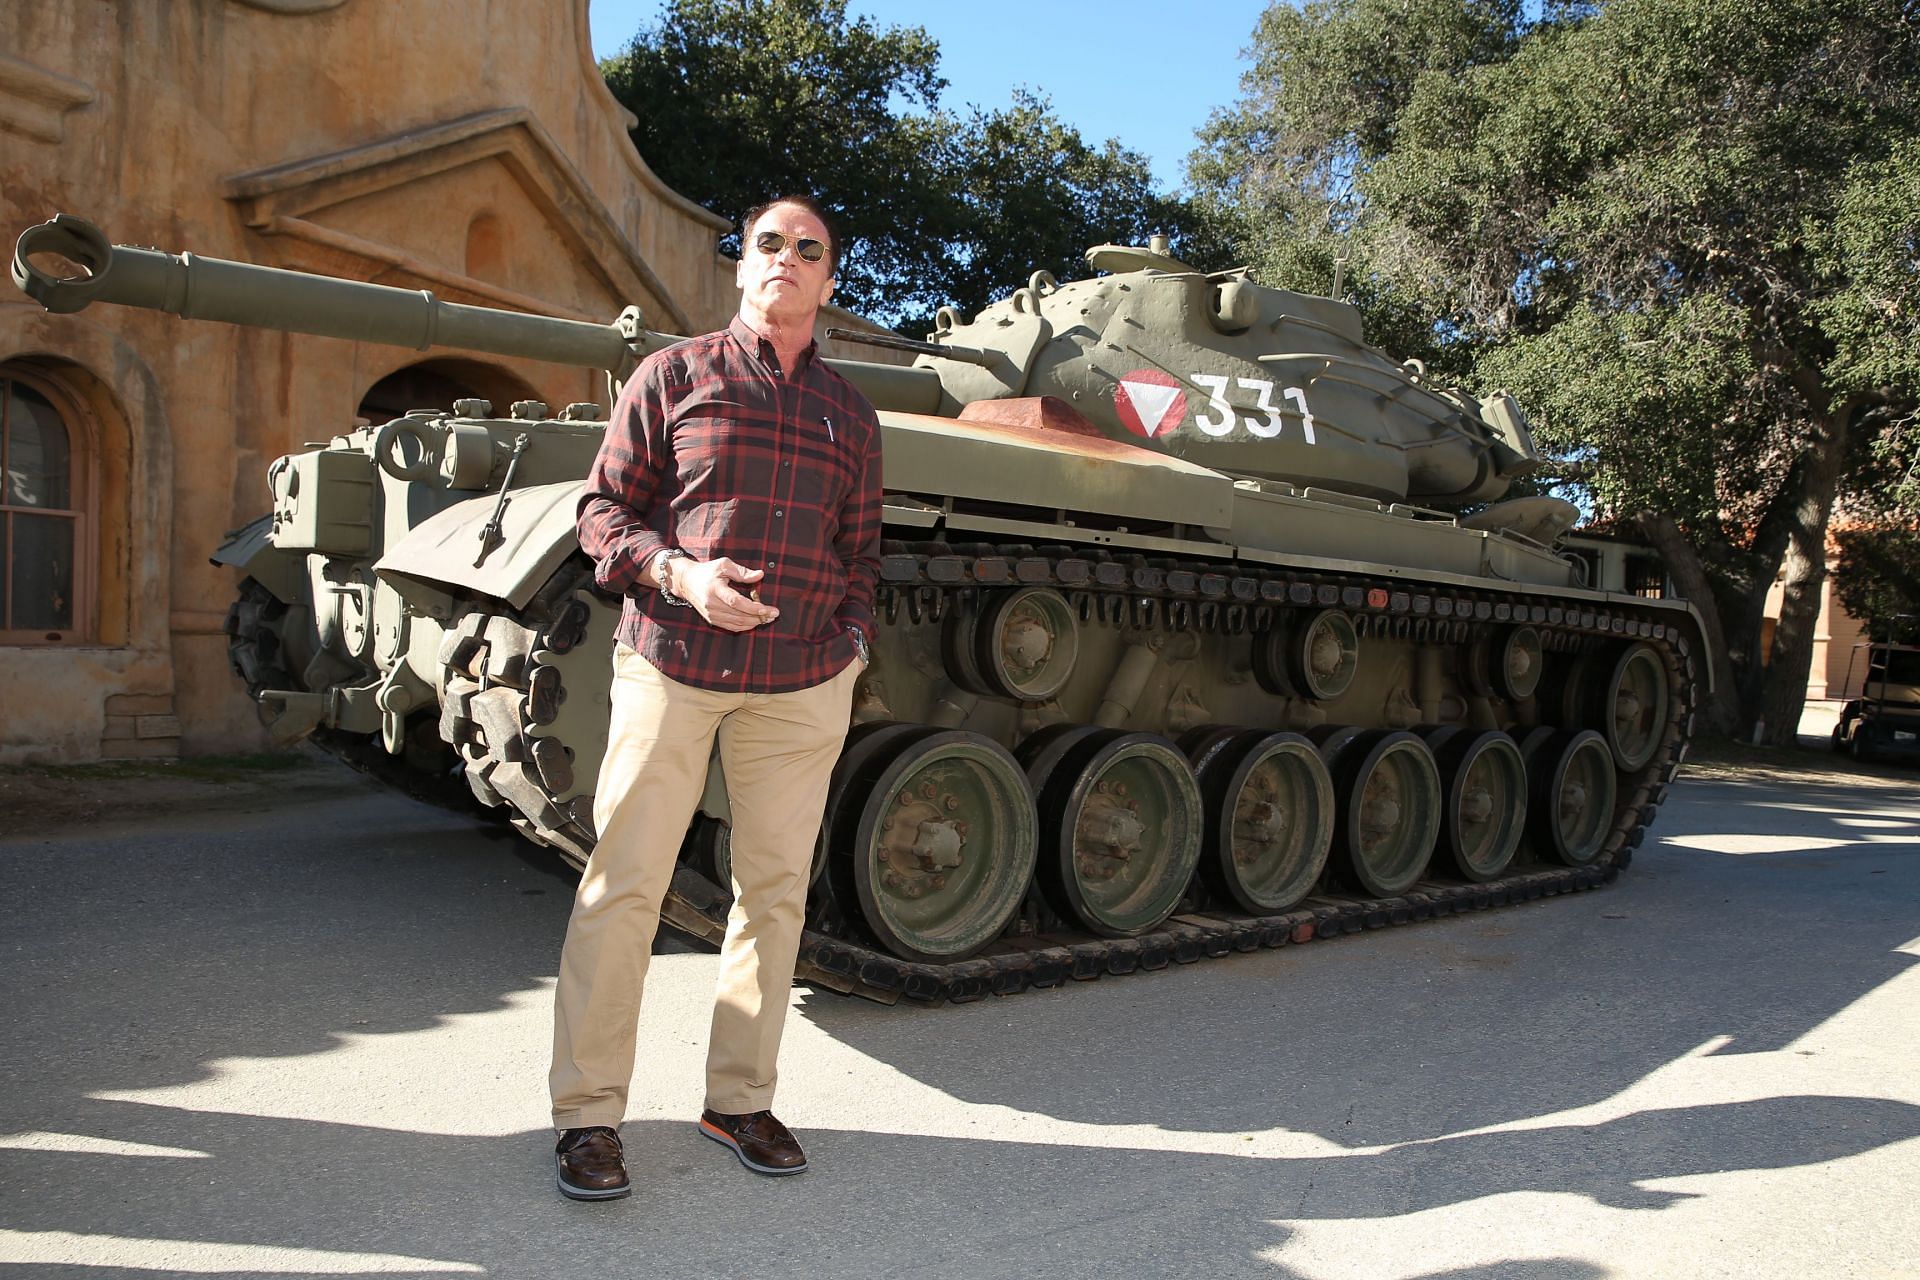 Arnold Schwarzenegger poses in front of his tank (Image via Collider)